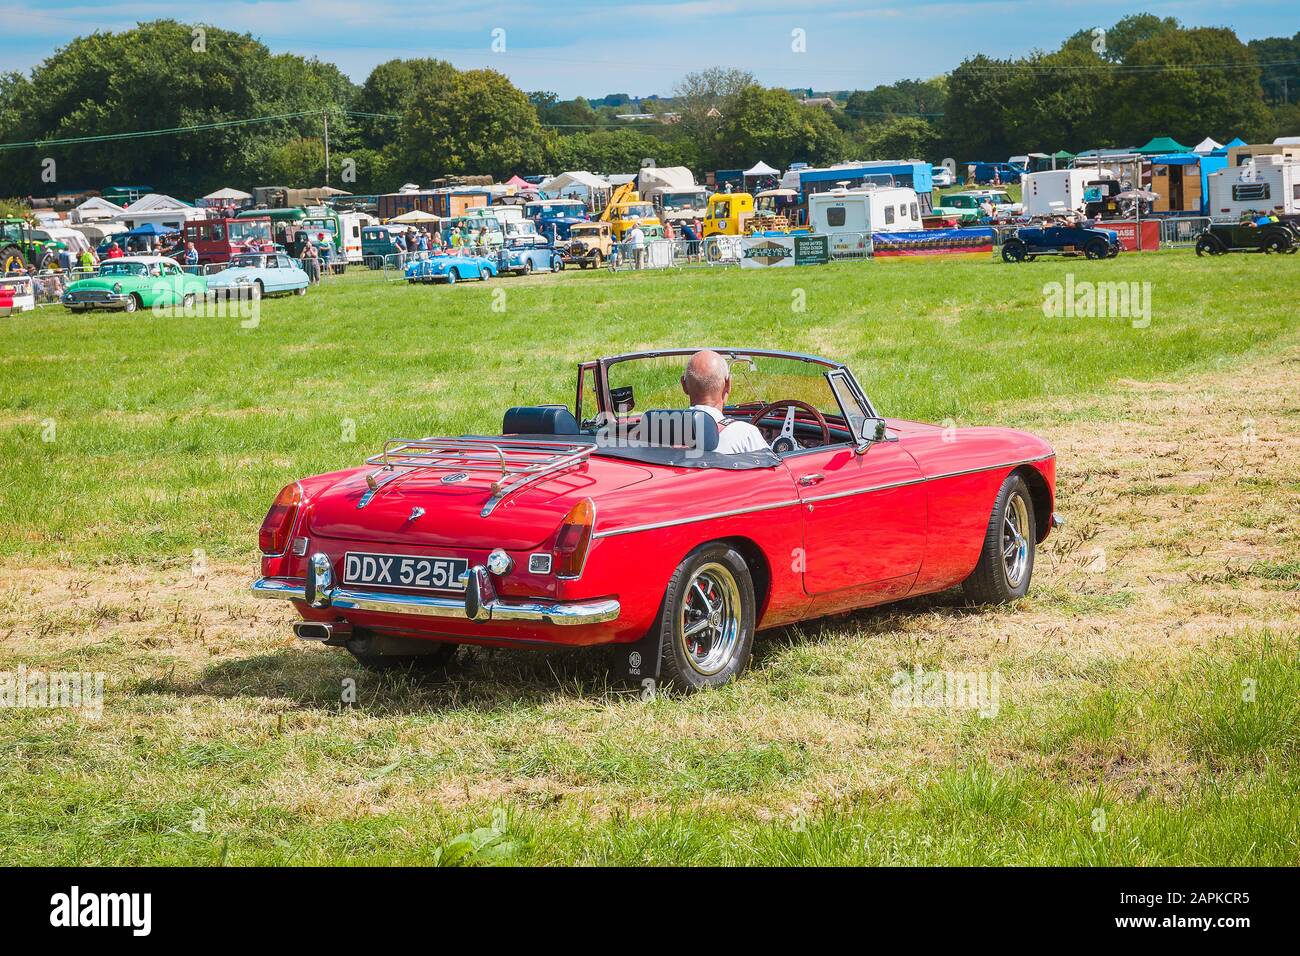 A red open-top MGB British sports car from the 1970s on show at Heddington Country Fair in Wiltshire England UK Stock Photo